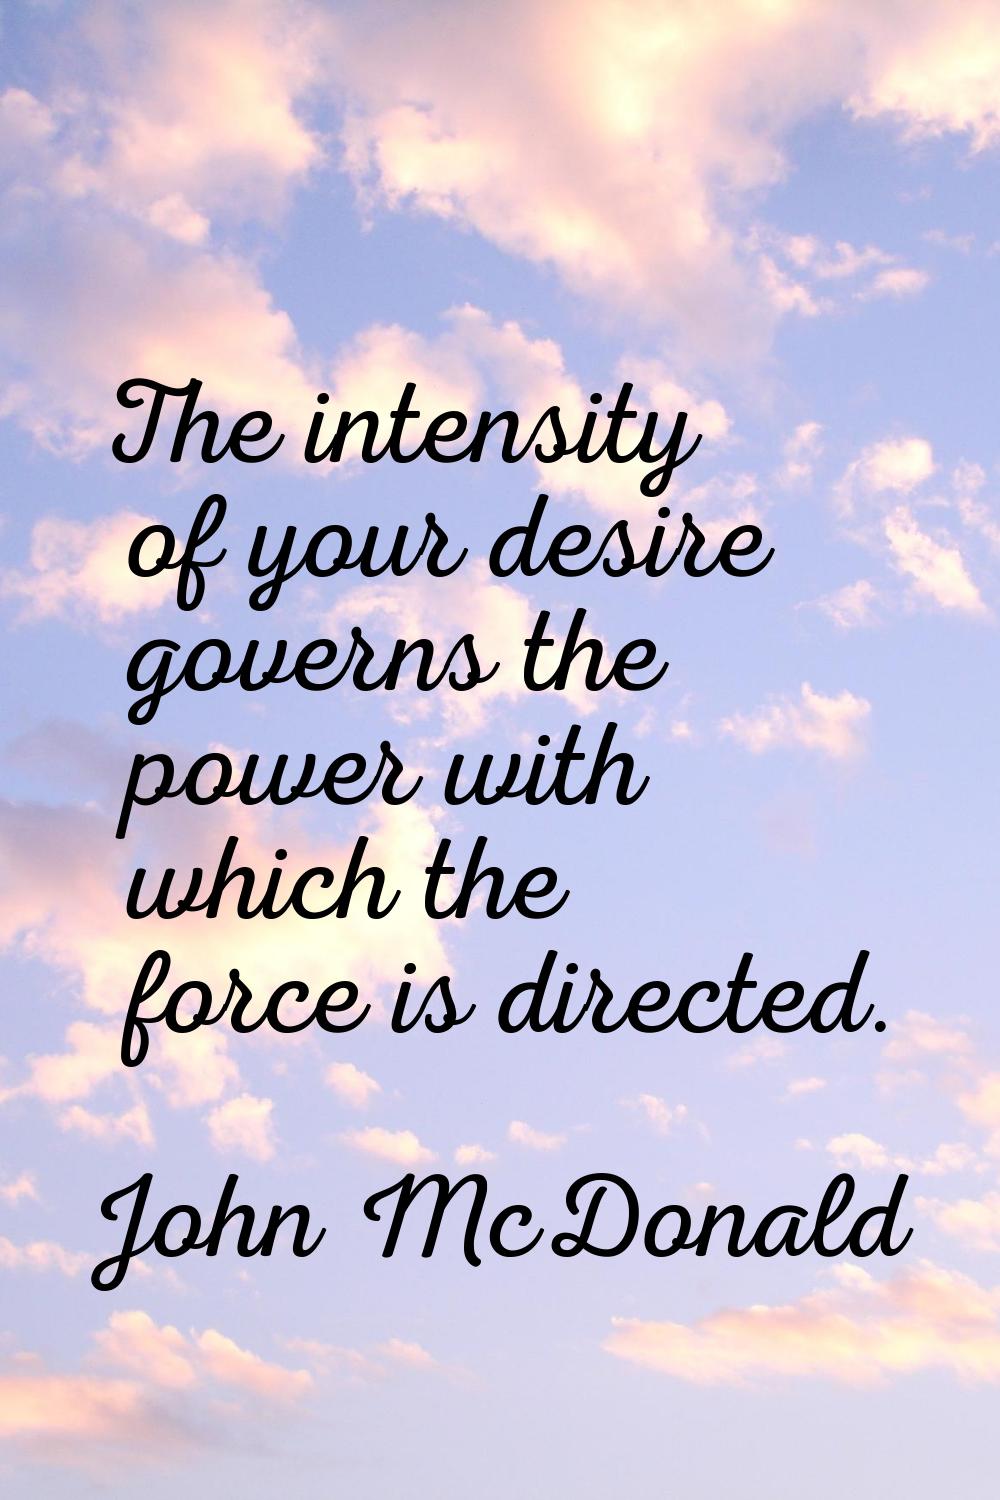 The intensity of your desire governs the power with which the force is directed.